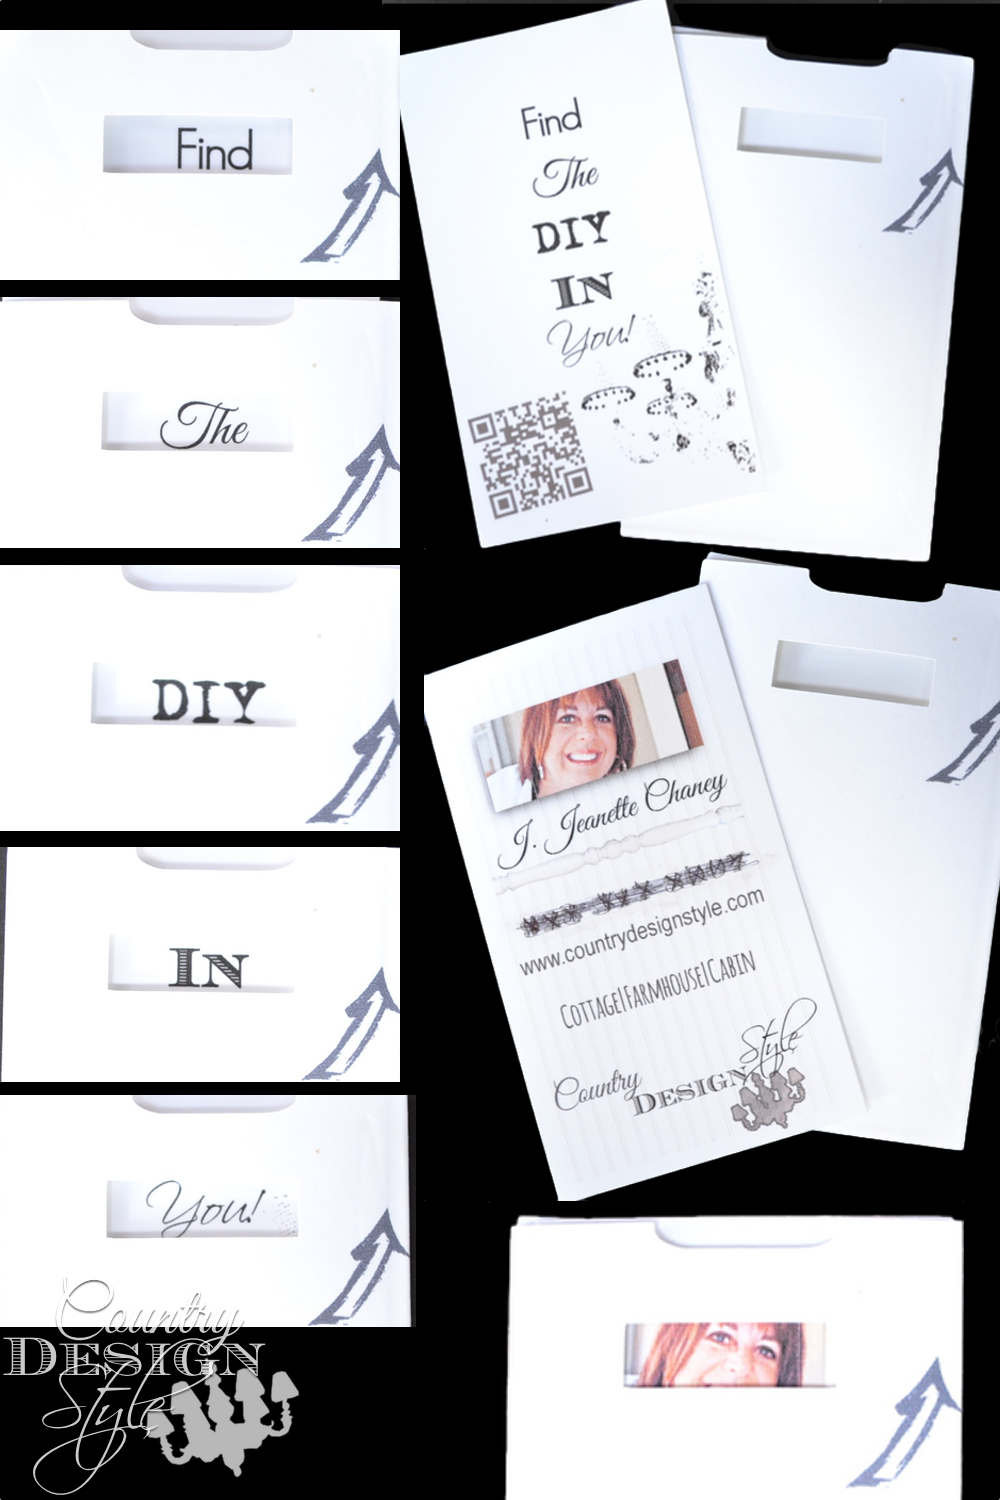 Peek-a-boo-sliding-business-cards. Needed something creative for an event. These worked perfect. Country Design Style